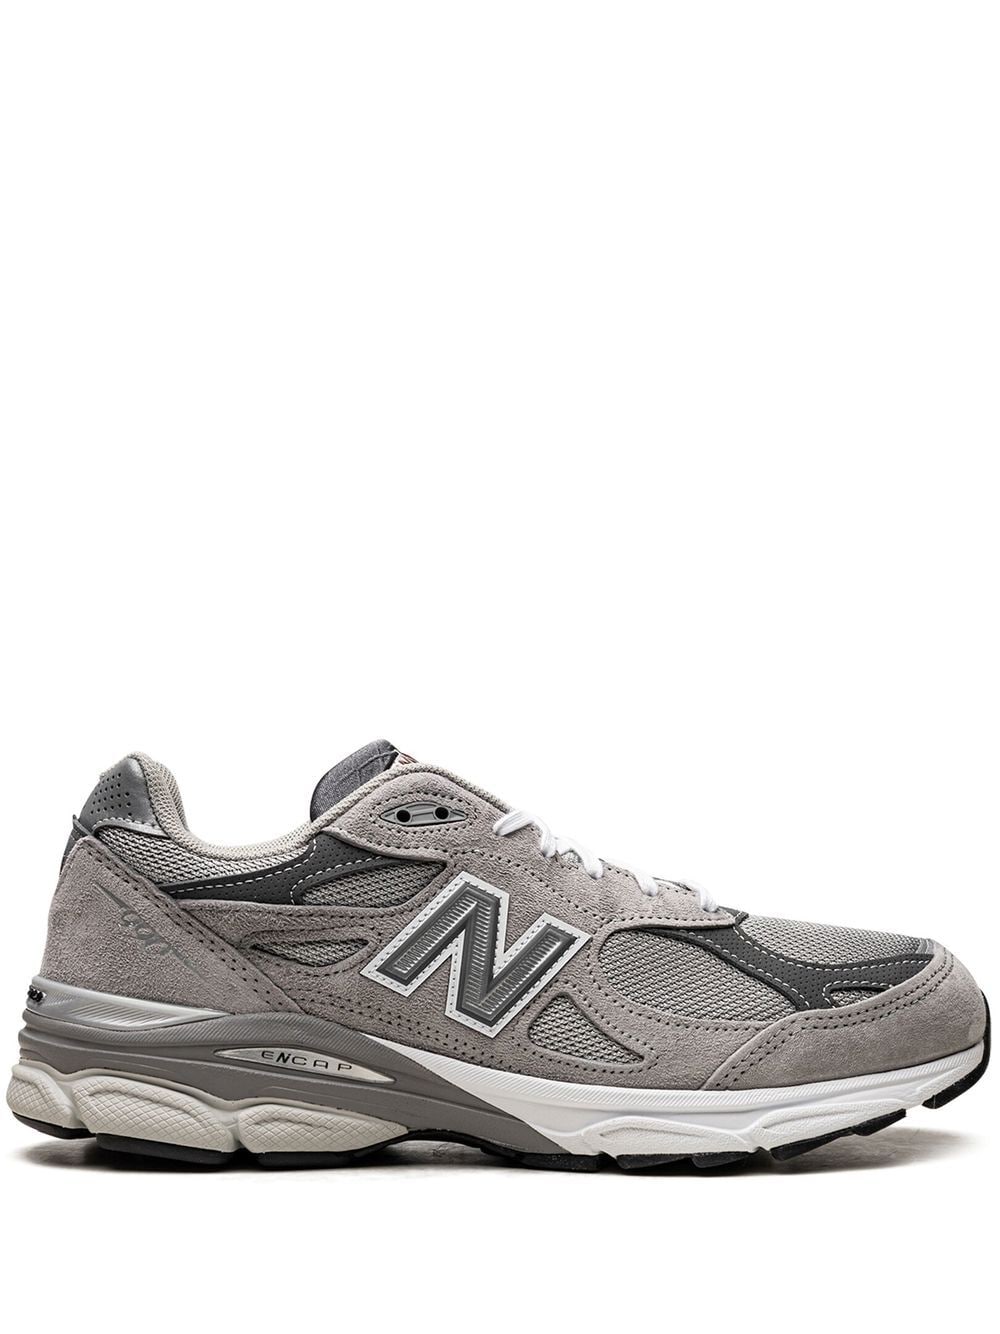 New Balance 990v3 low-top sneakers - Grey